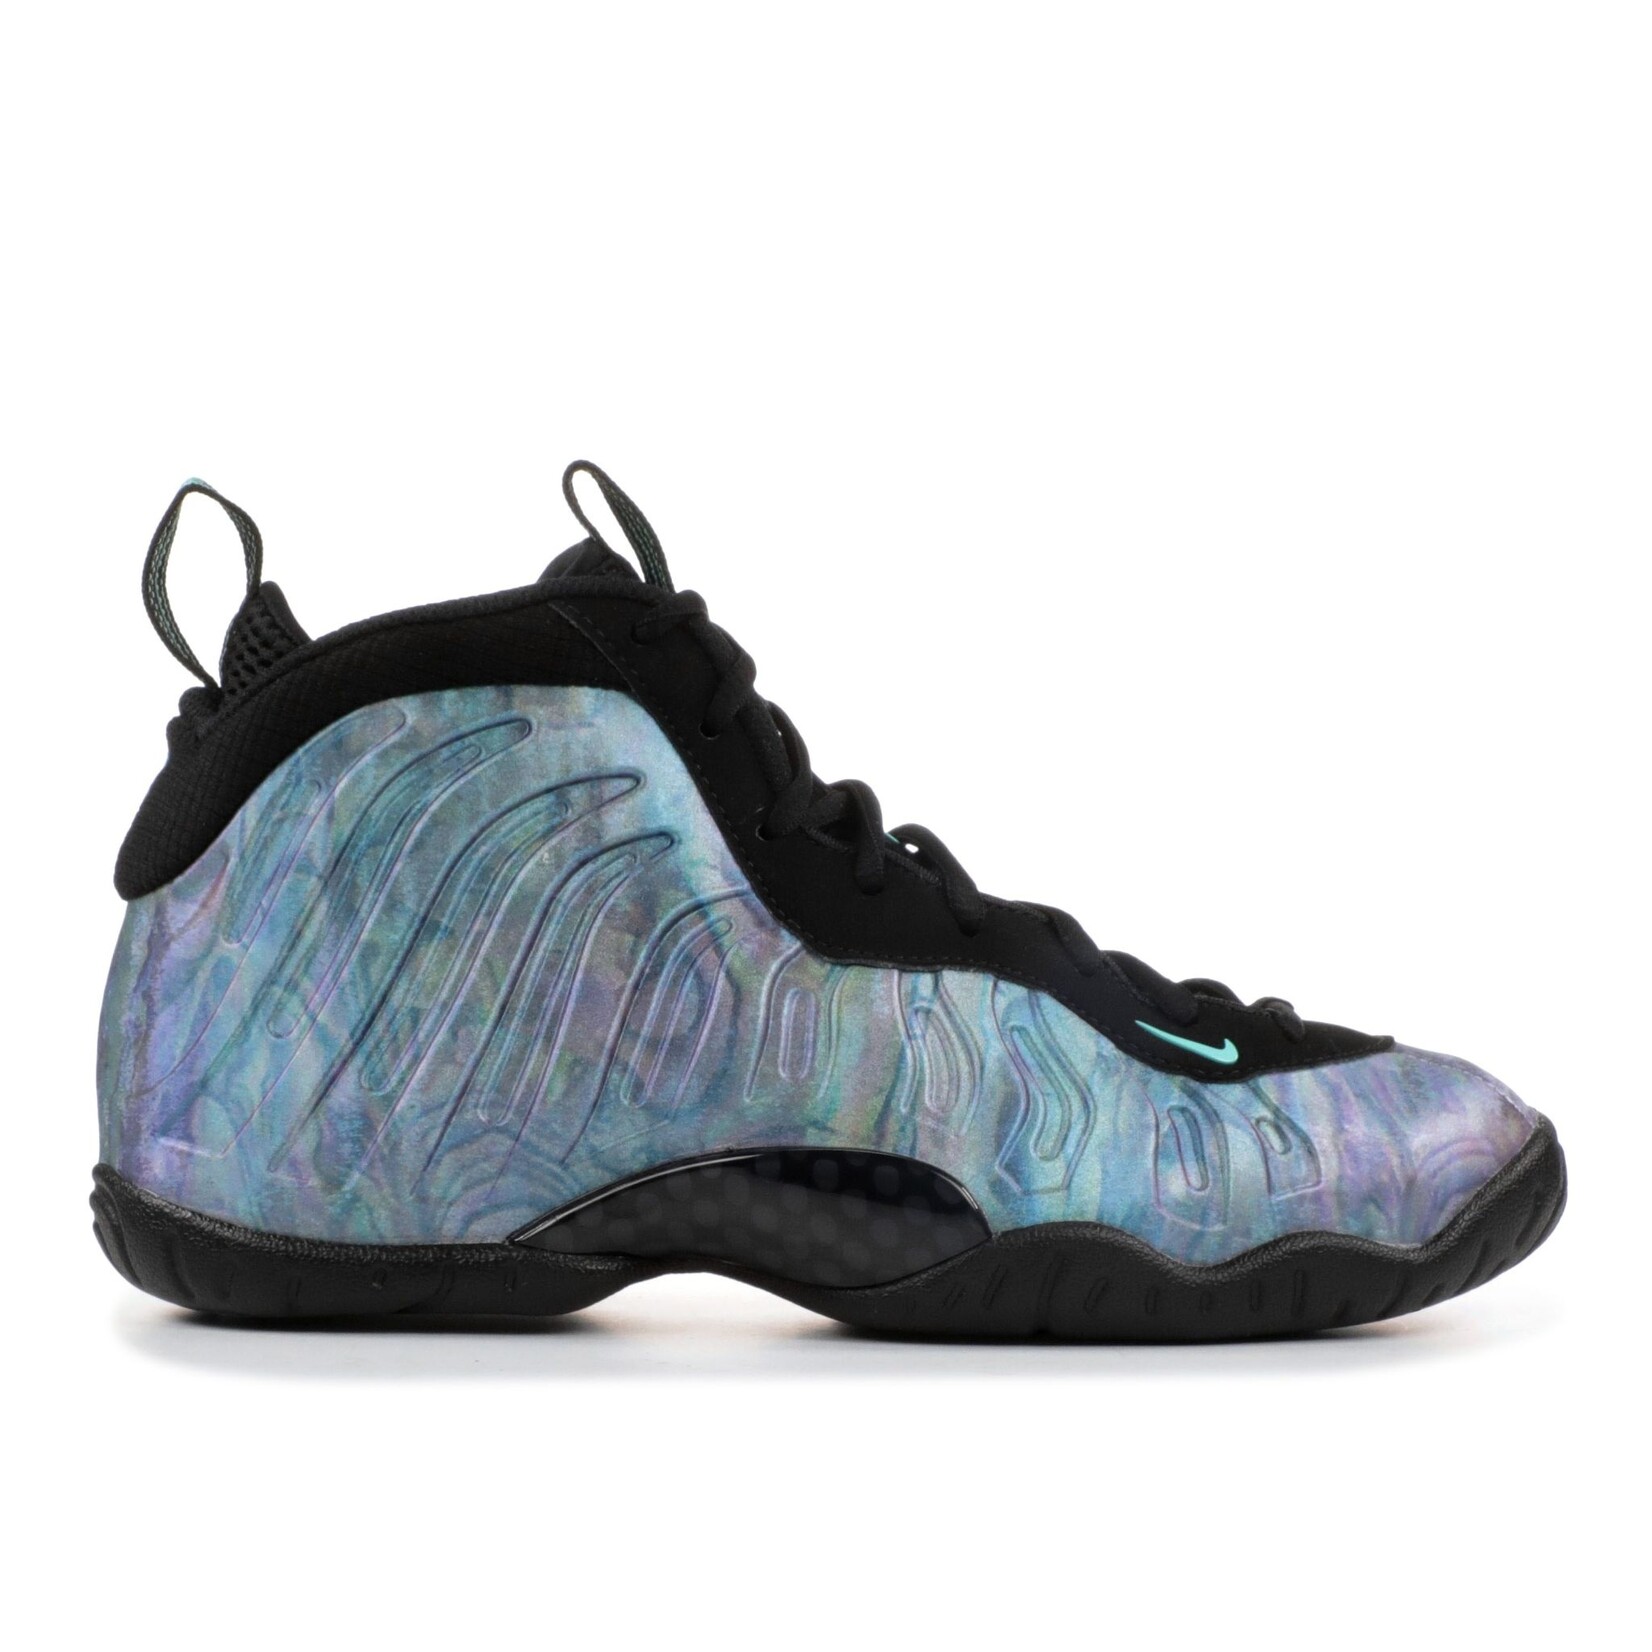 Nike Nike Air Foamposite One Abalone (GS) Size 10c, DS BRAND NEW